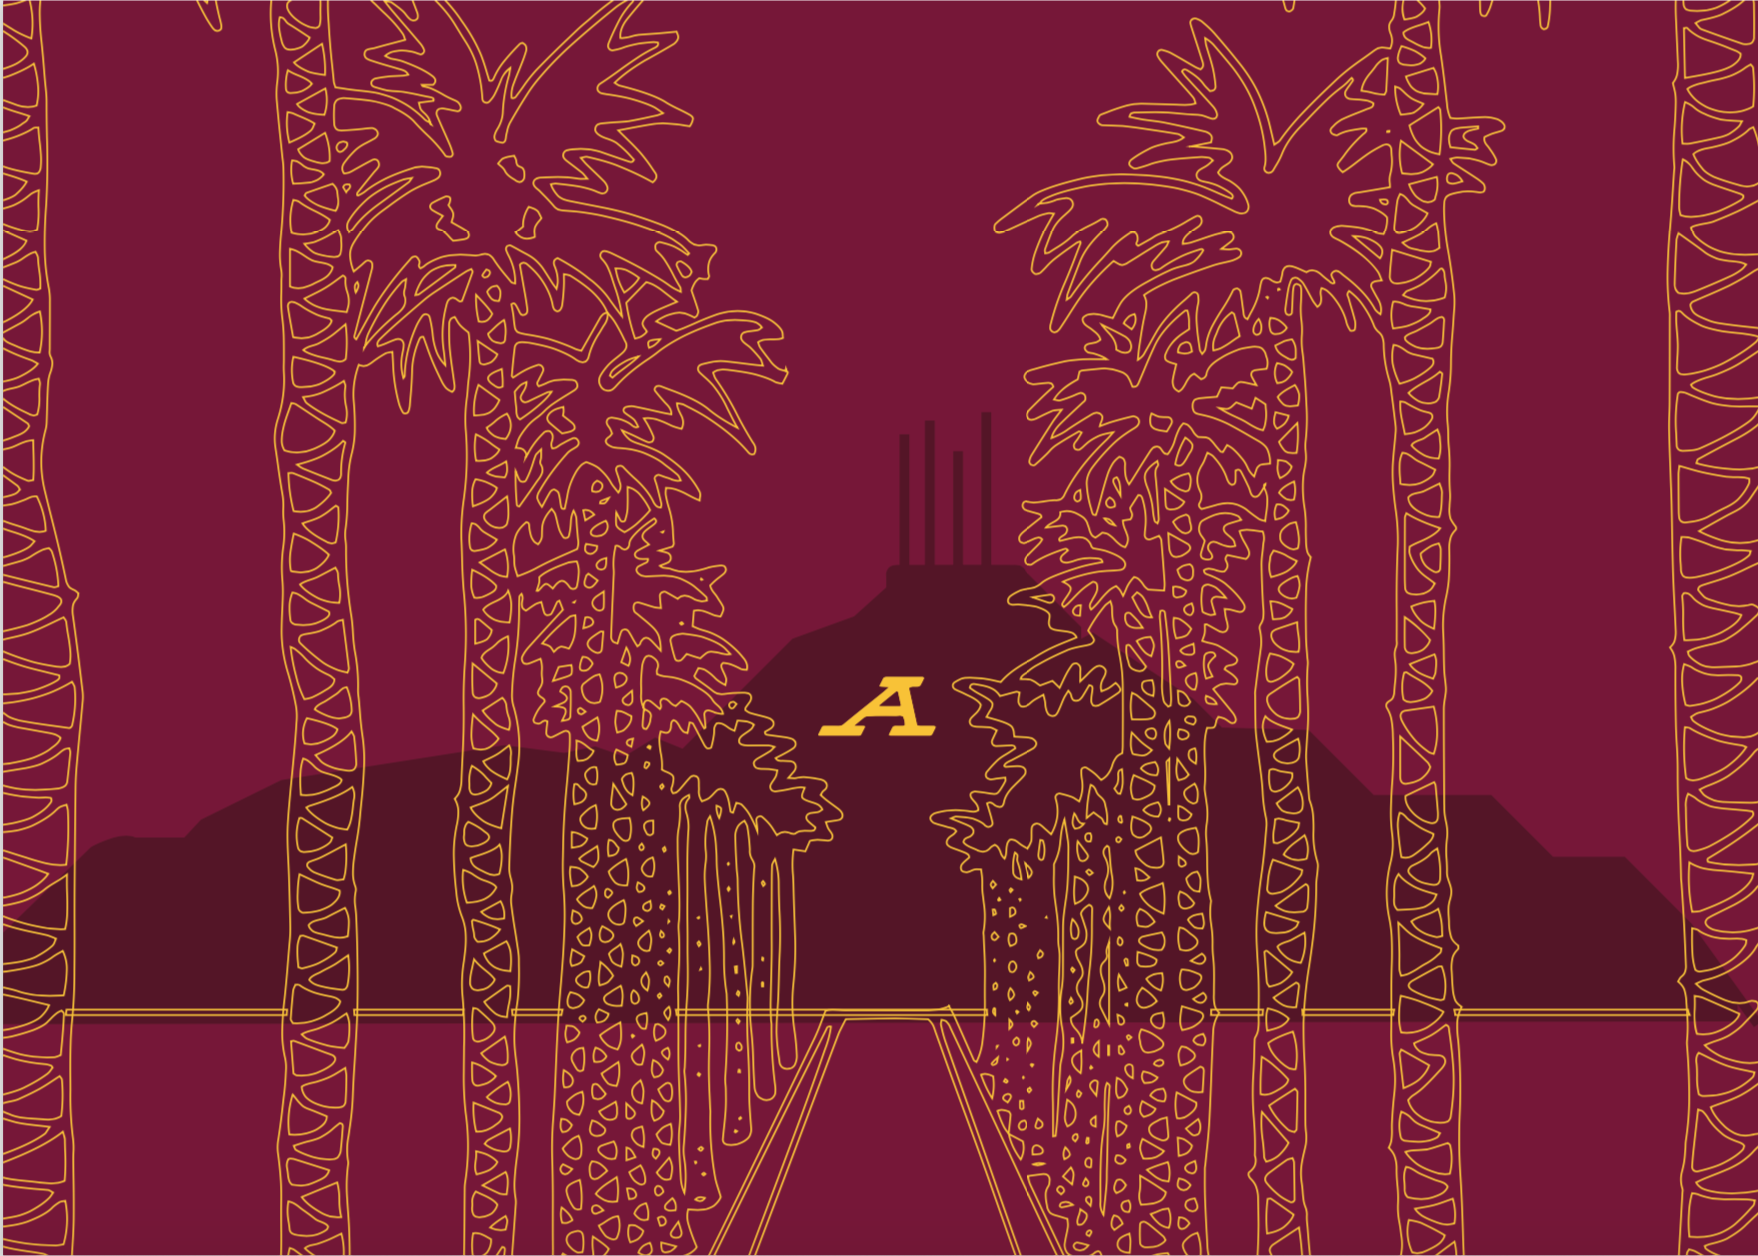 A stylized illustration of Tempe's A Mountain